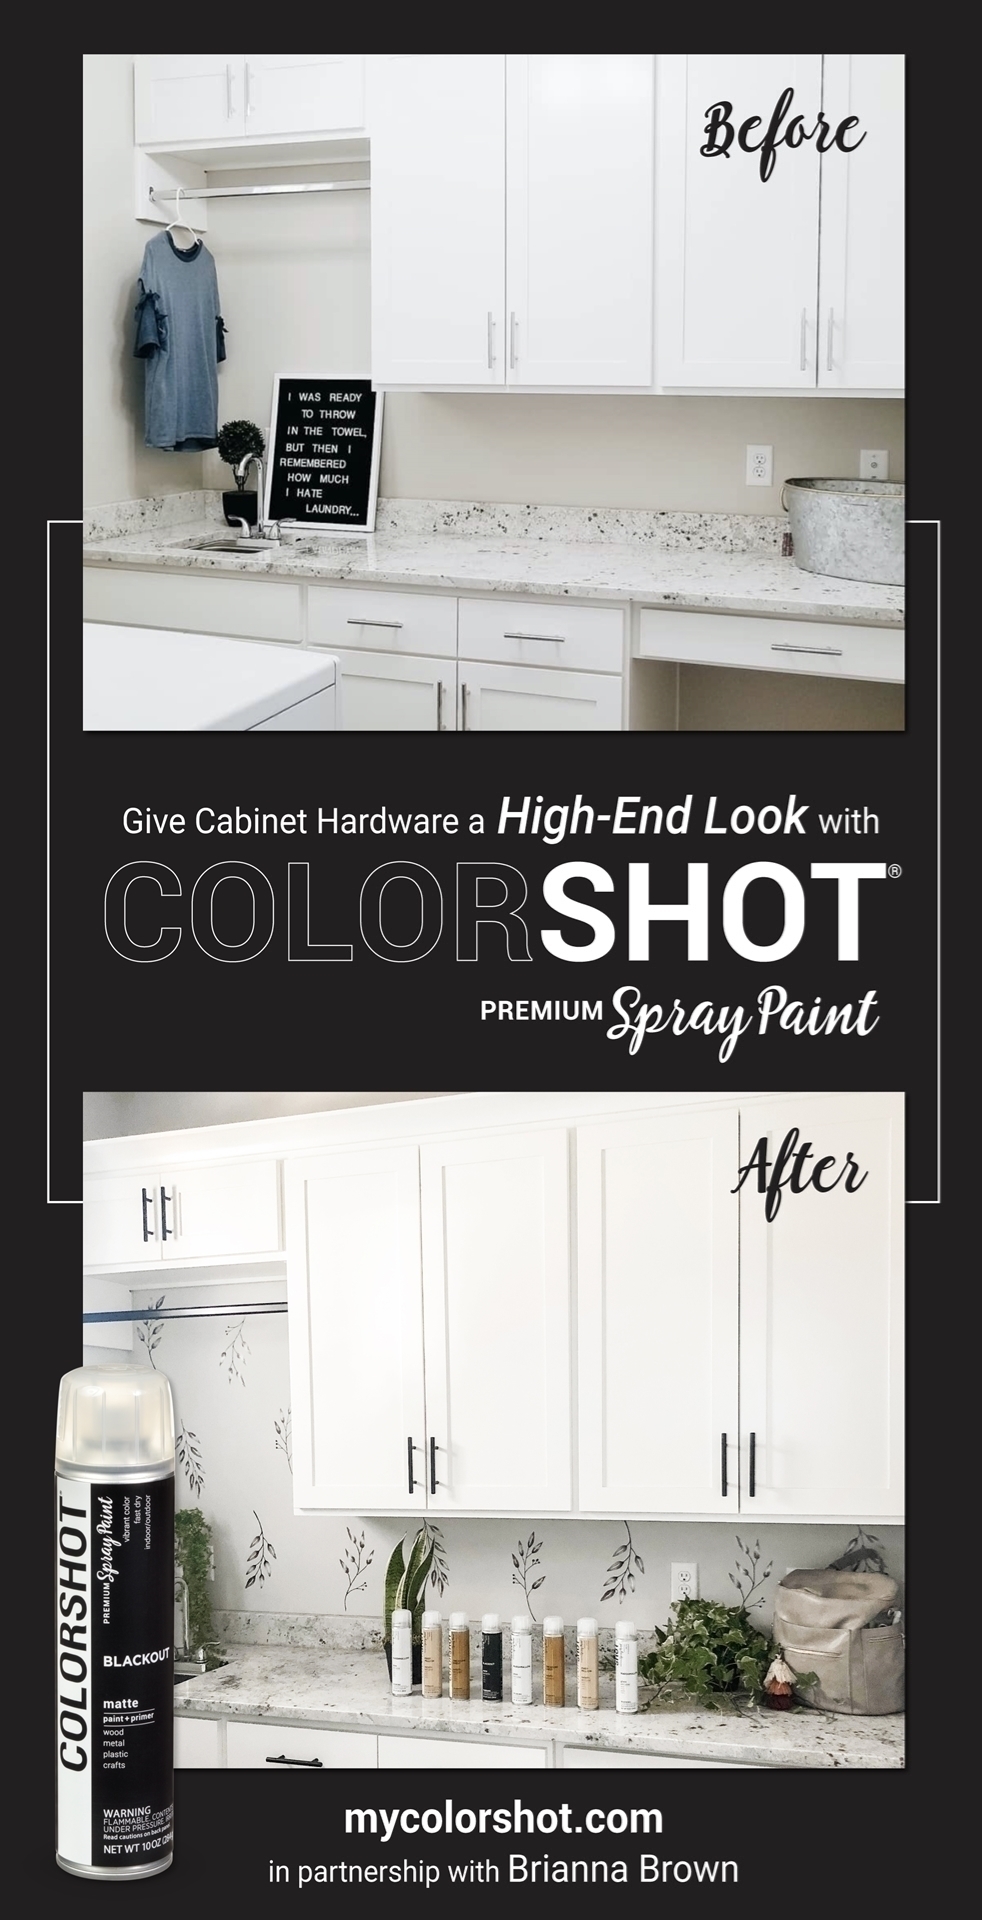 Spray Paint Cabinet Hardware for a High-End Look